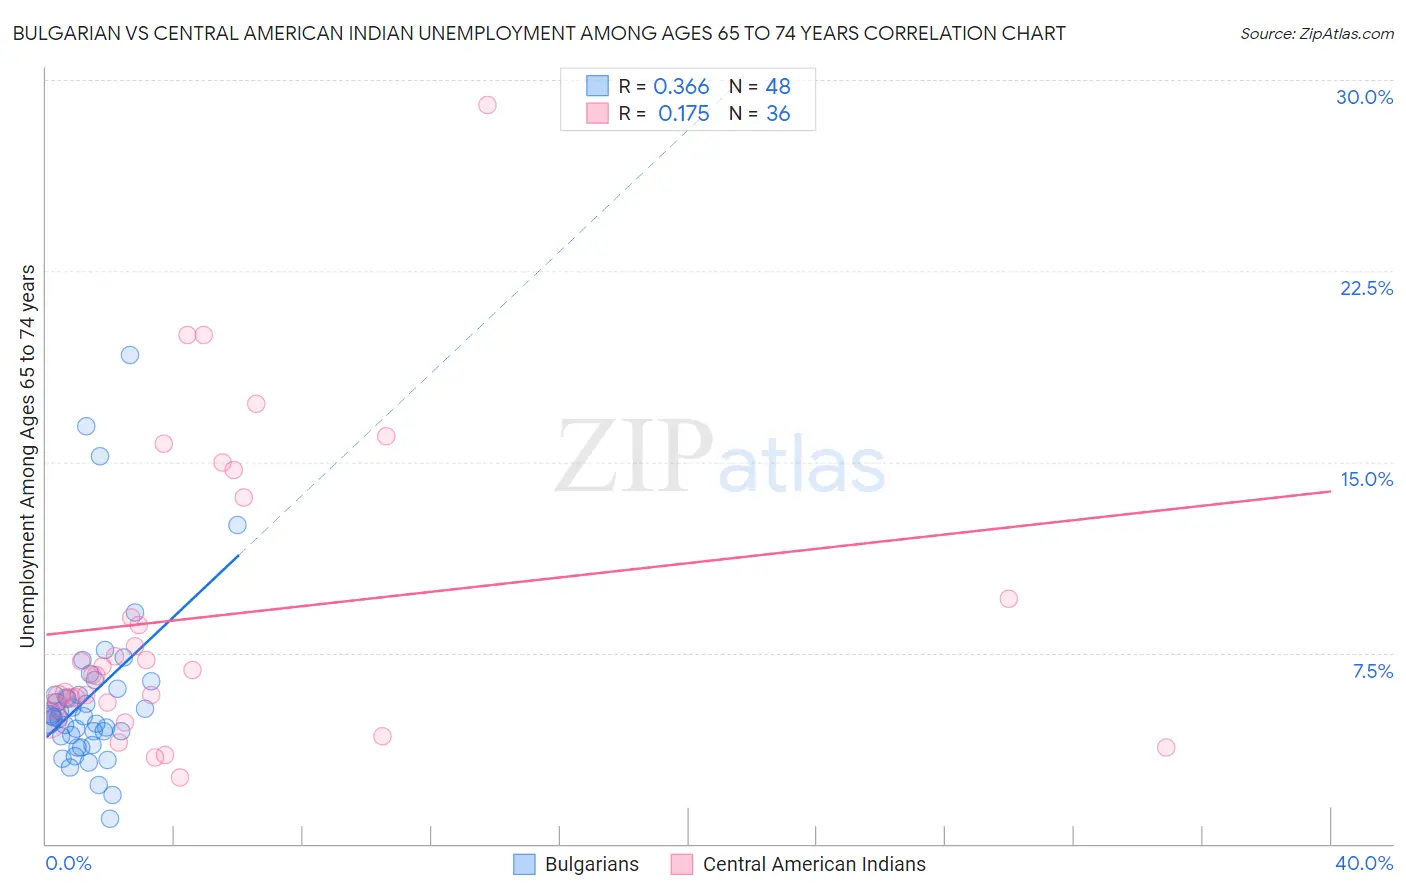 Bulgarian vs Central American Indian Unemployment Among Ages 65 to 74 years